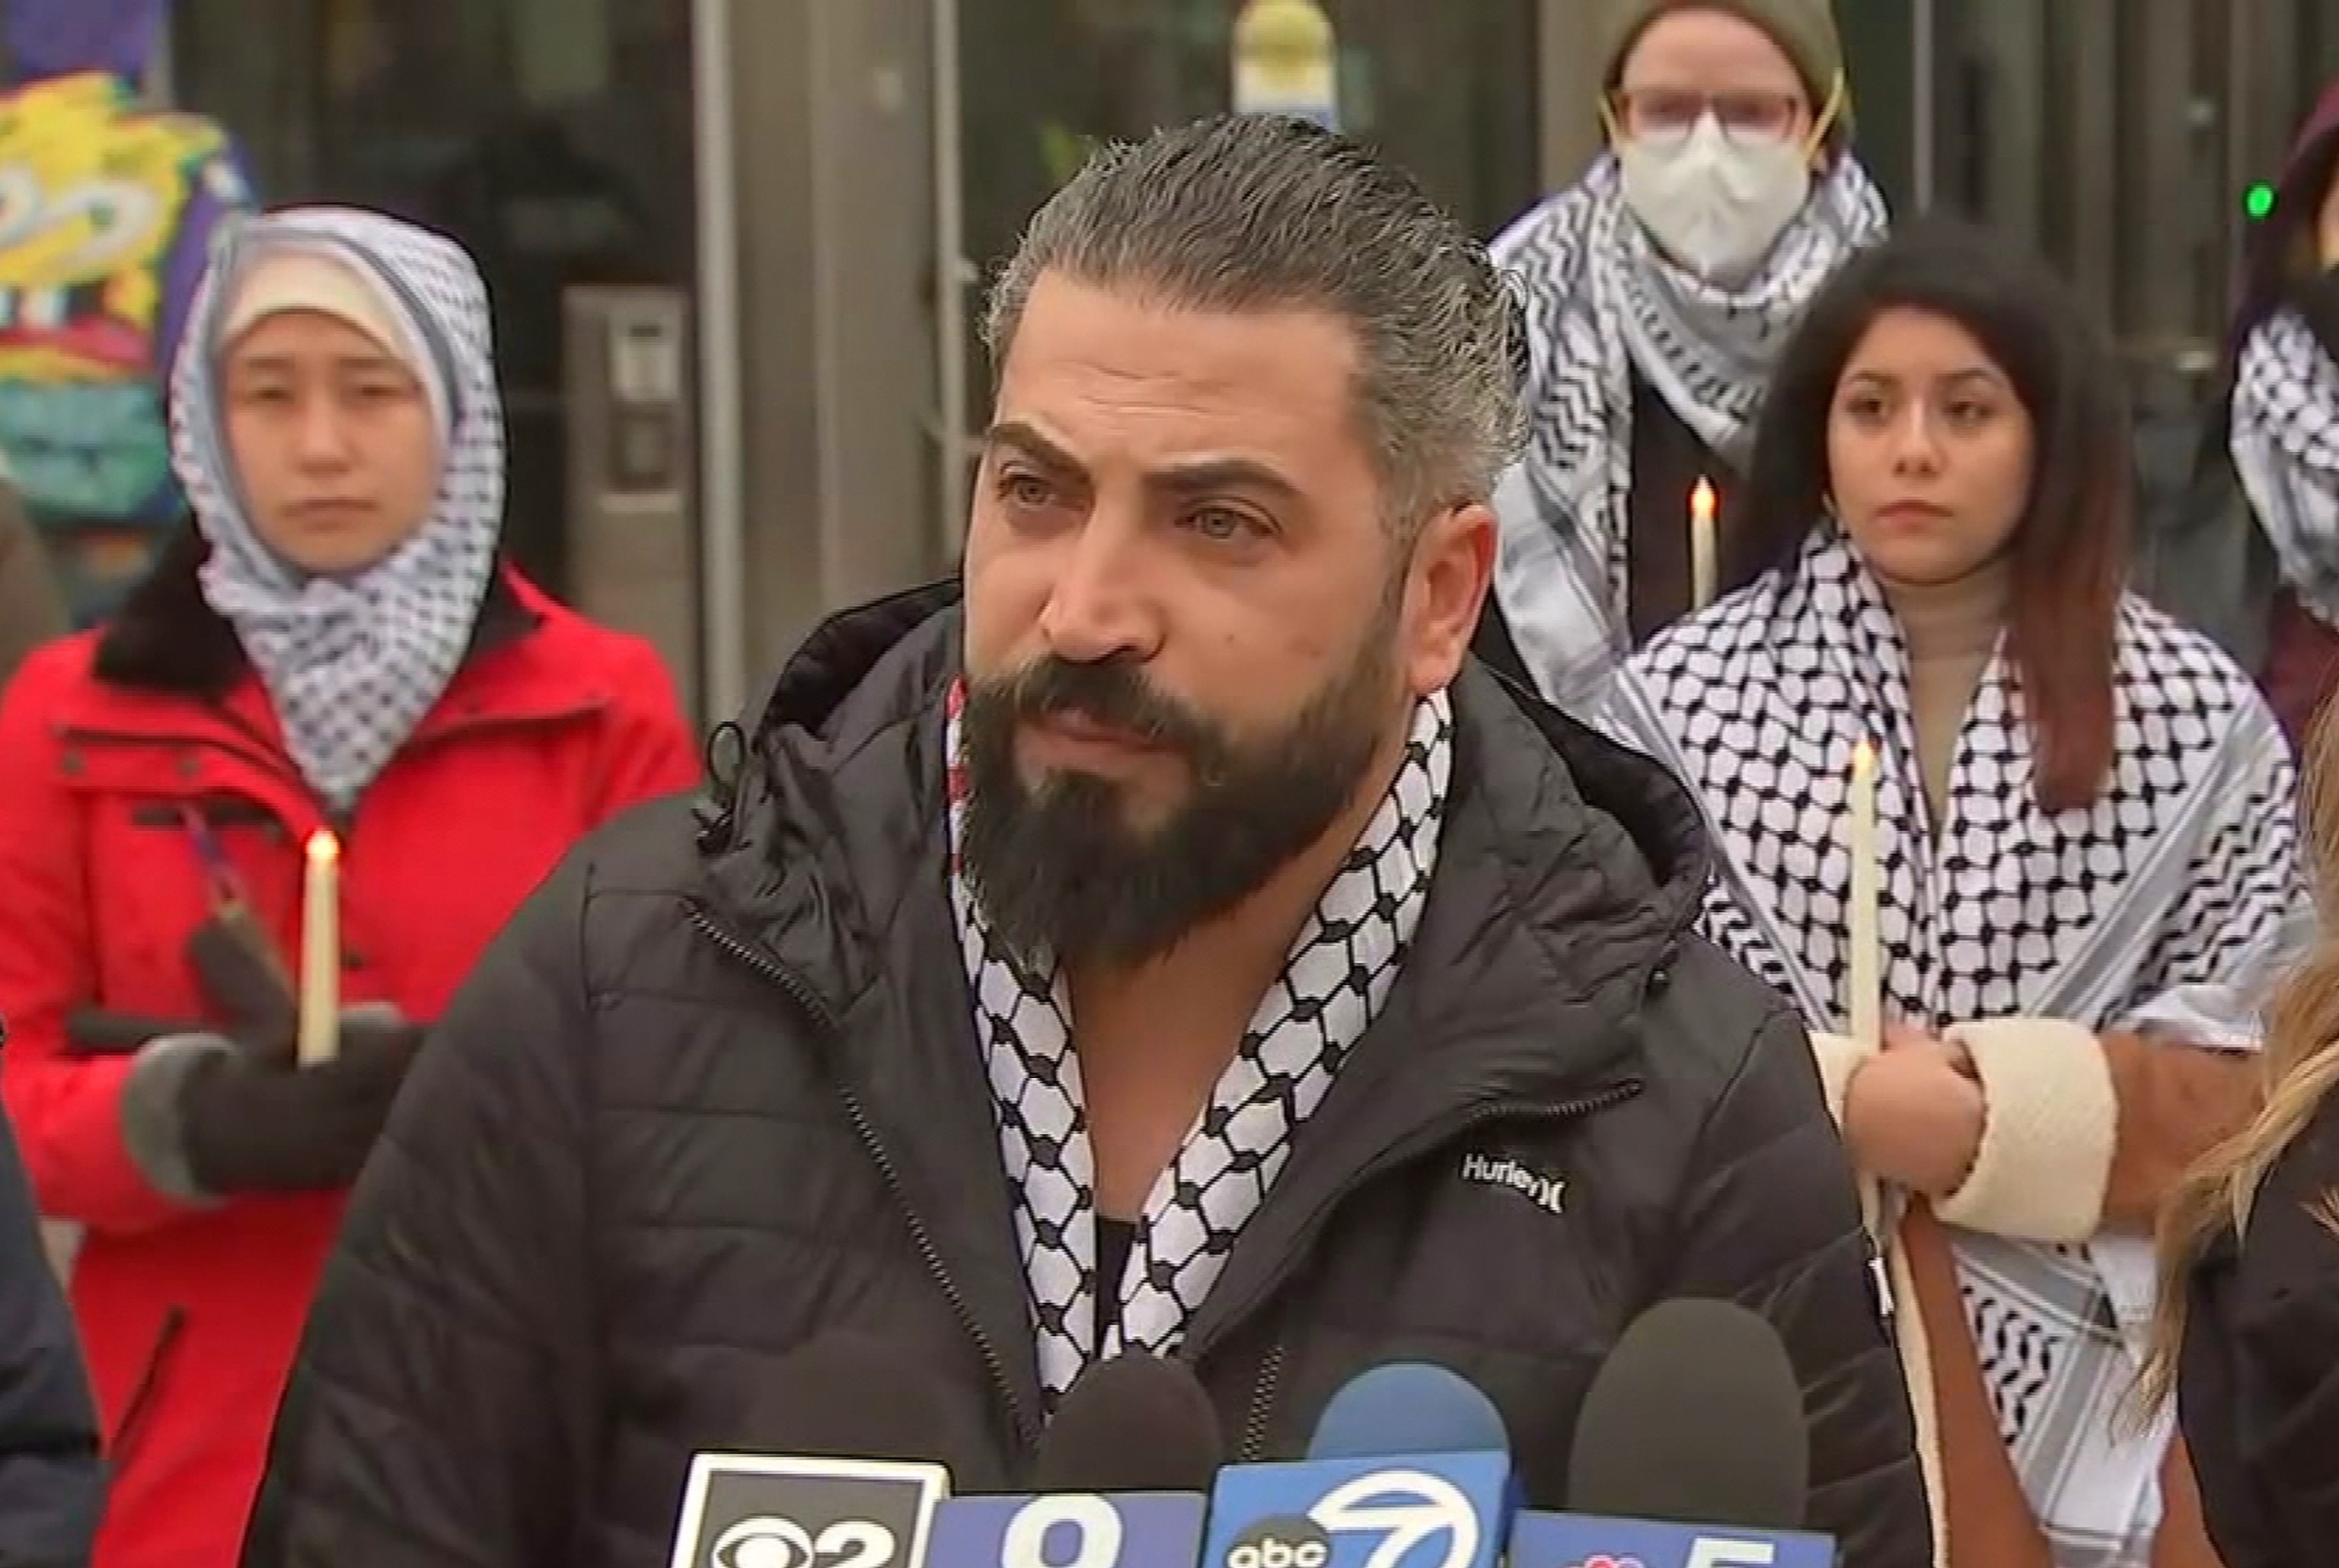 PHOTO: Odai Al-Fayoume, the father of Wadee Al-Fayoume, a 6-year-old Muslim boy fatally stabbed in a hate crime police say was linked to the Israel-Hamas war, speaks at a Jan. 3, 2023, vigil before a court hearing for the 71-year-old suspect in the crime.